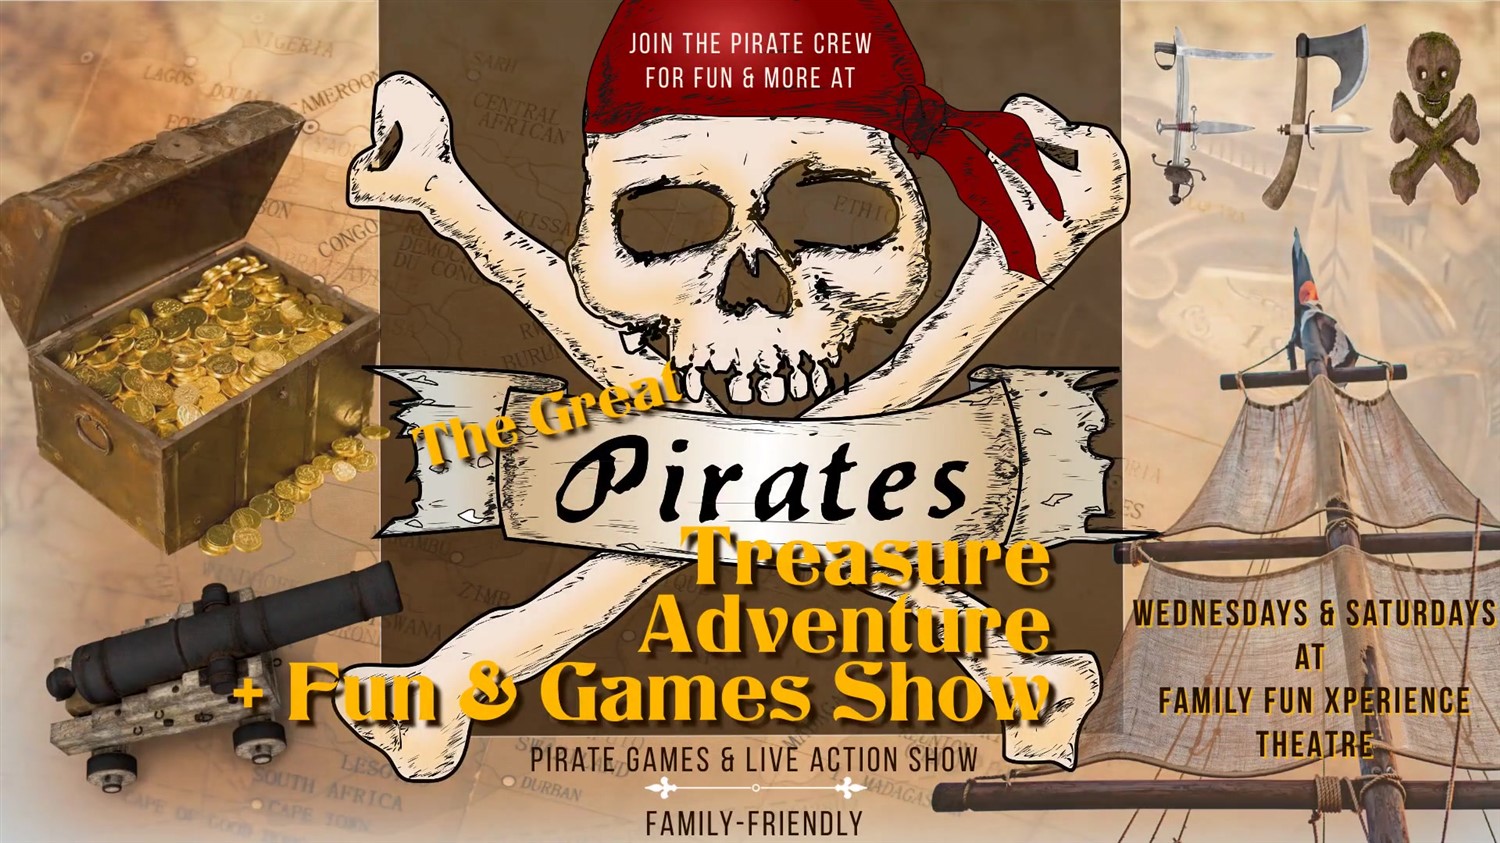 PIRATE ADVENTURE FUN & GAMES SHOW 5-Star Xperience with the Foggy FoX Pirates! on sep. 07, 19:00@FFX Theatre - Pick a seat, Buy tickets and Get information on Family Fun Xperience tickets.ffxshow.org